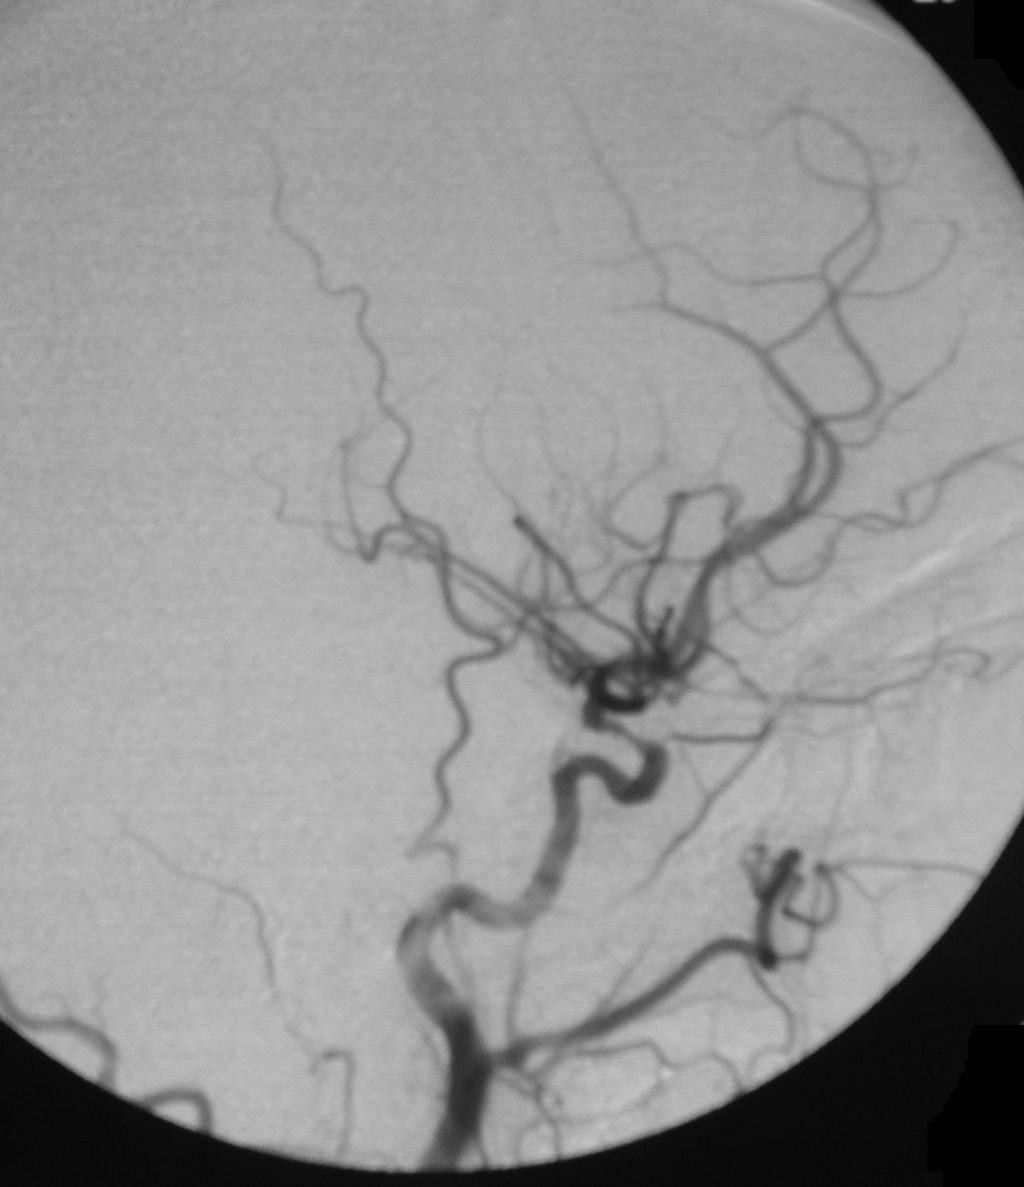 Moya-Moya LICA RICA Other Causes Obliterative arteropathy with b/l distal intracranial ICA occlusions or highgrade stenoses Hypercoaguable States Cancer Antiphospholipid antibody syndrome Usually